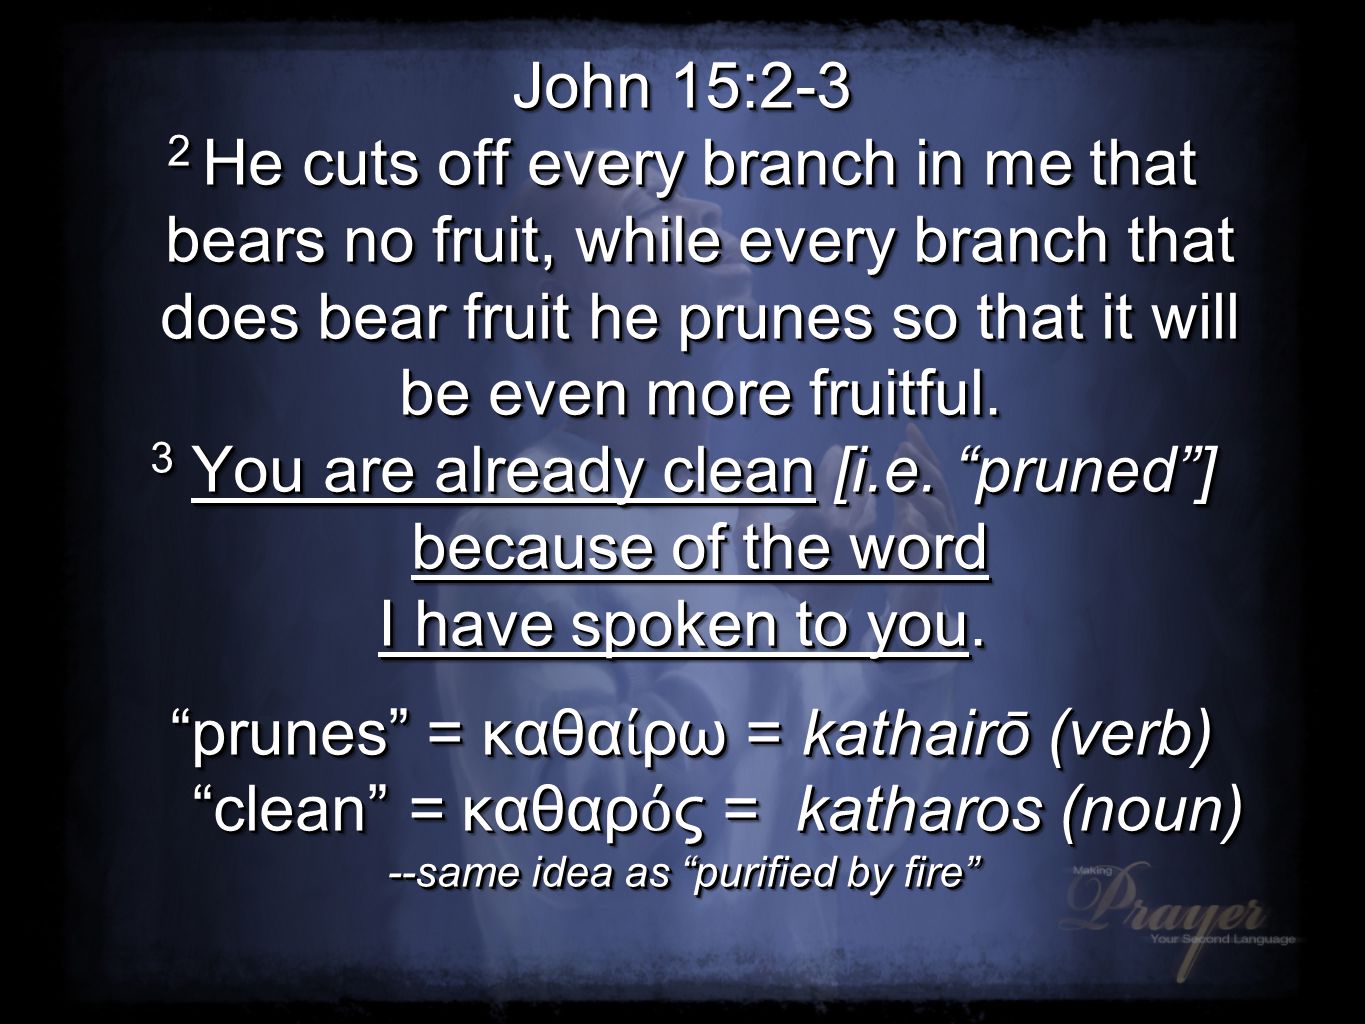 John 15:2-3 2 He cuts off every branch in me that bears no fruit, while every branch that does bear fruit he prunes so that it will be even more fruitful.